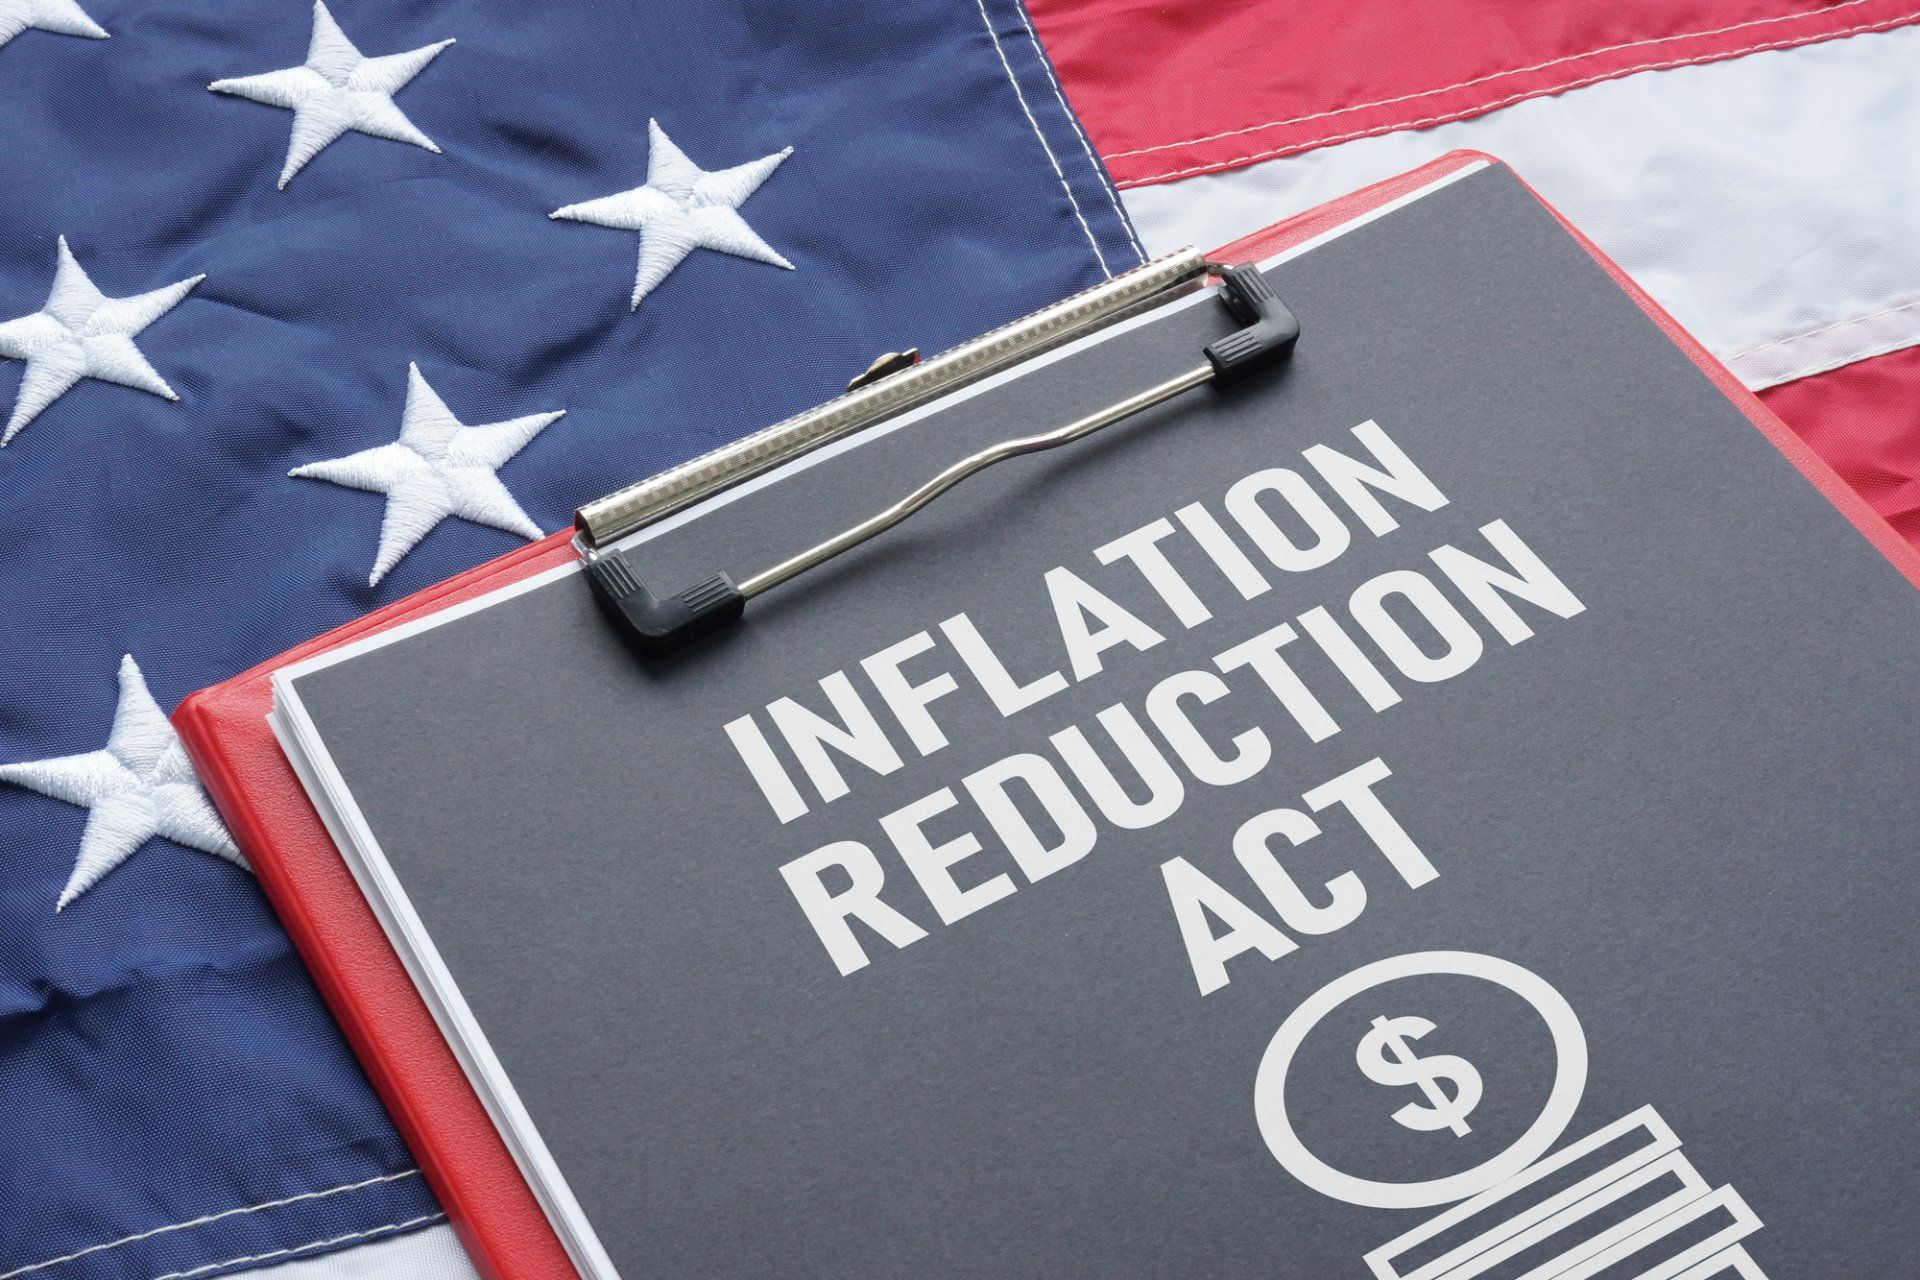 inflation-reduction-act-how-it-ll-impact-you-if-you-owe-the-irs